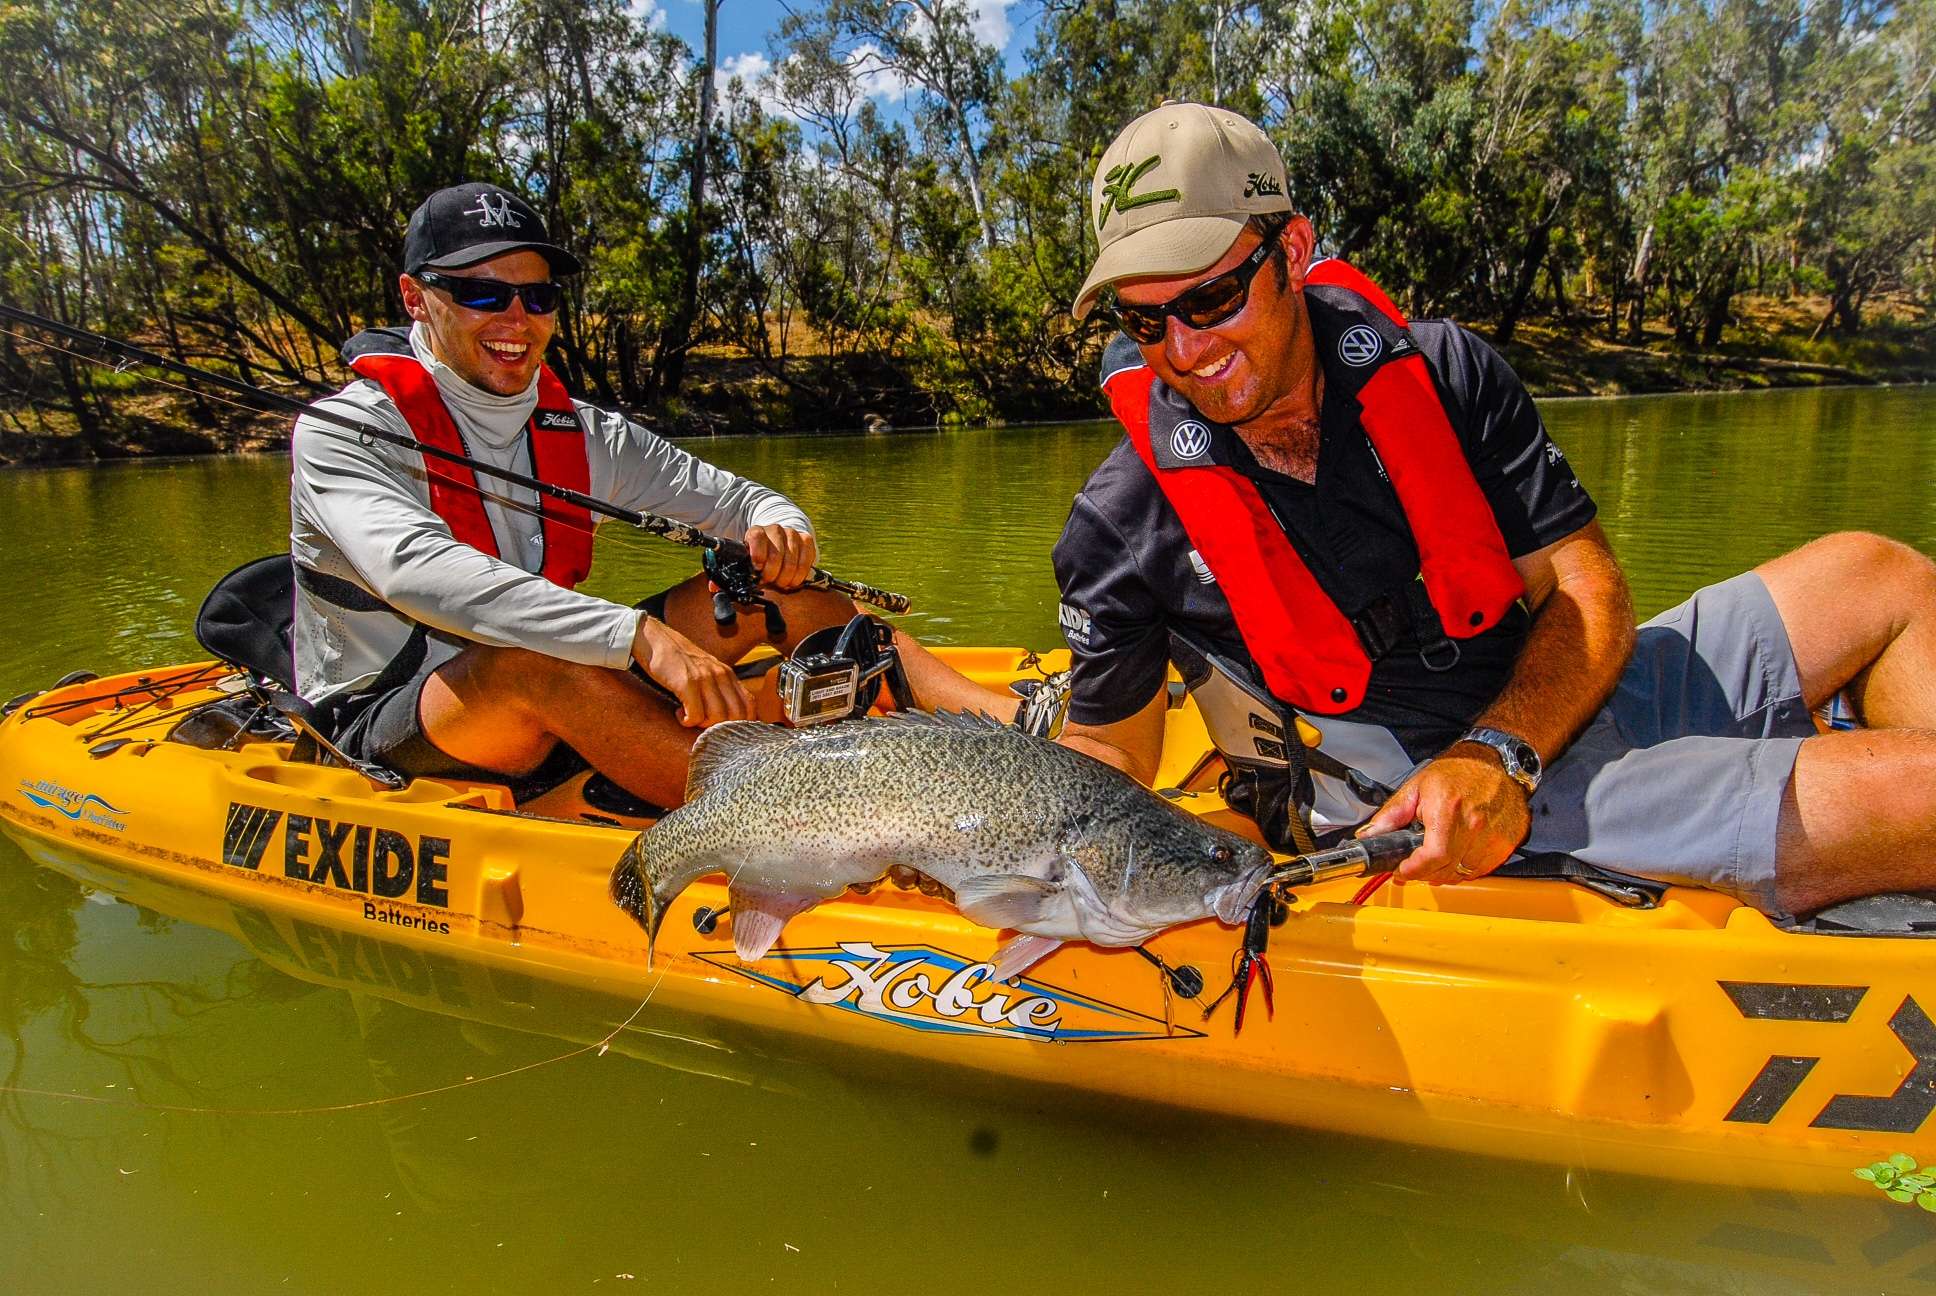 He caught the Murray cod on Australia's western rivers while filming for the national TV show Adventure Angler.